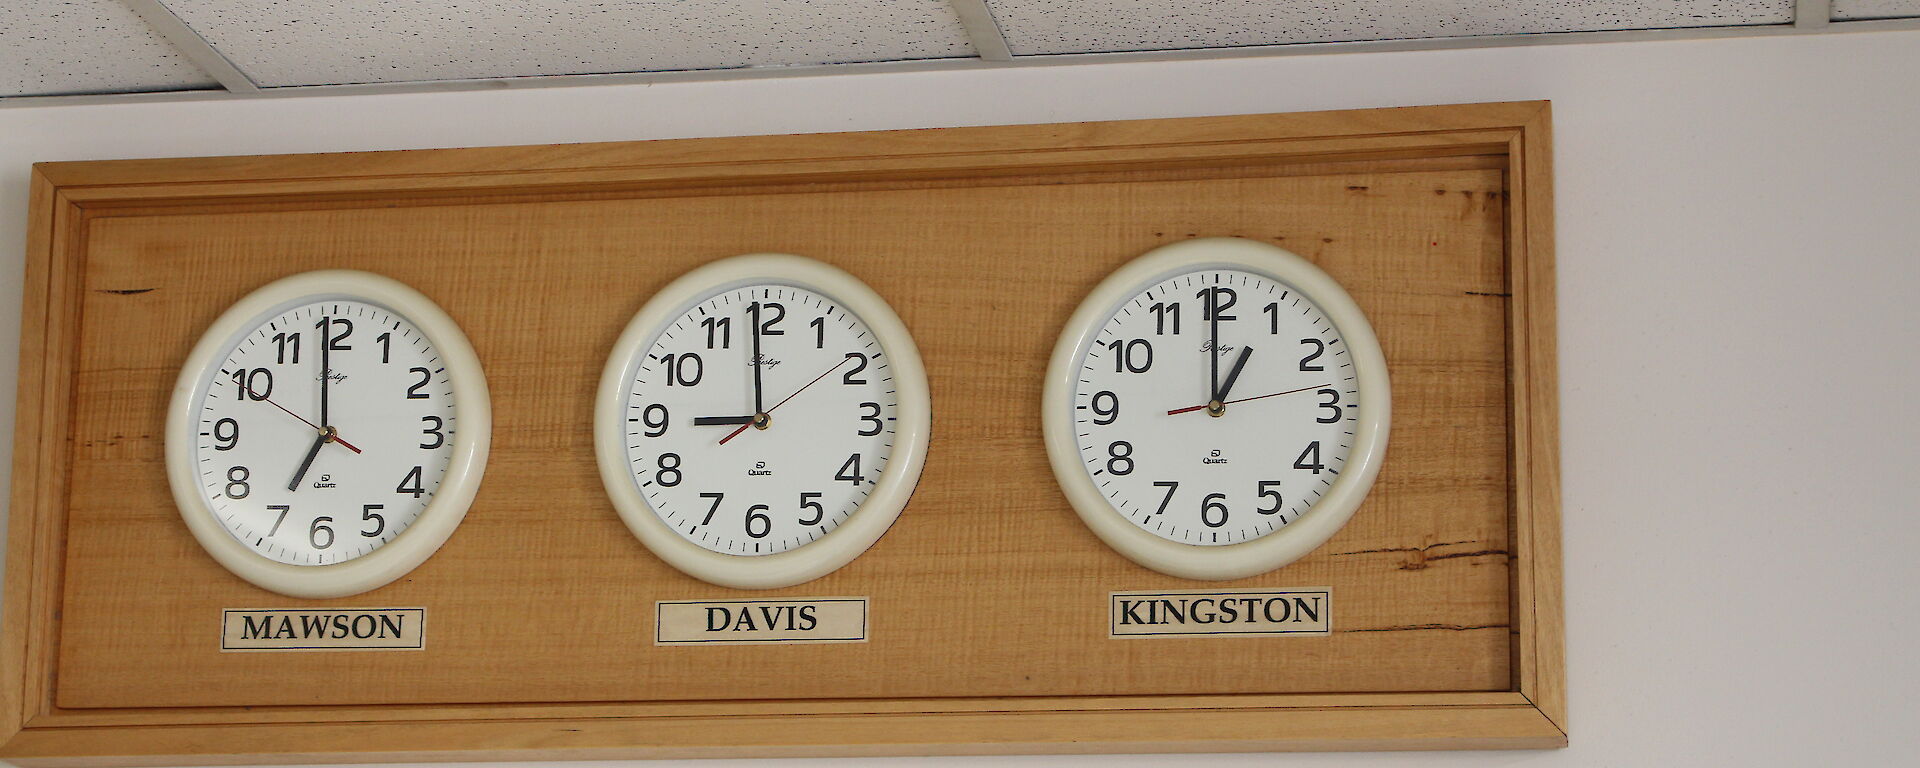 Clocks showing station time zones